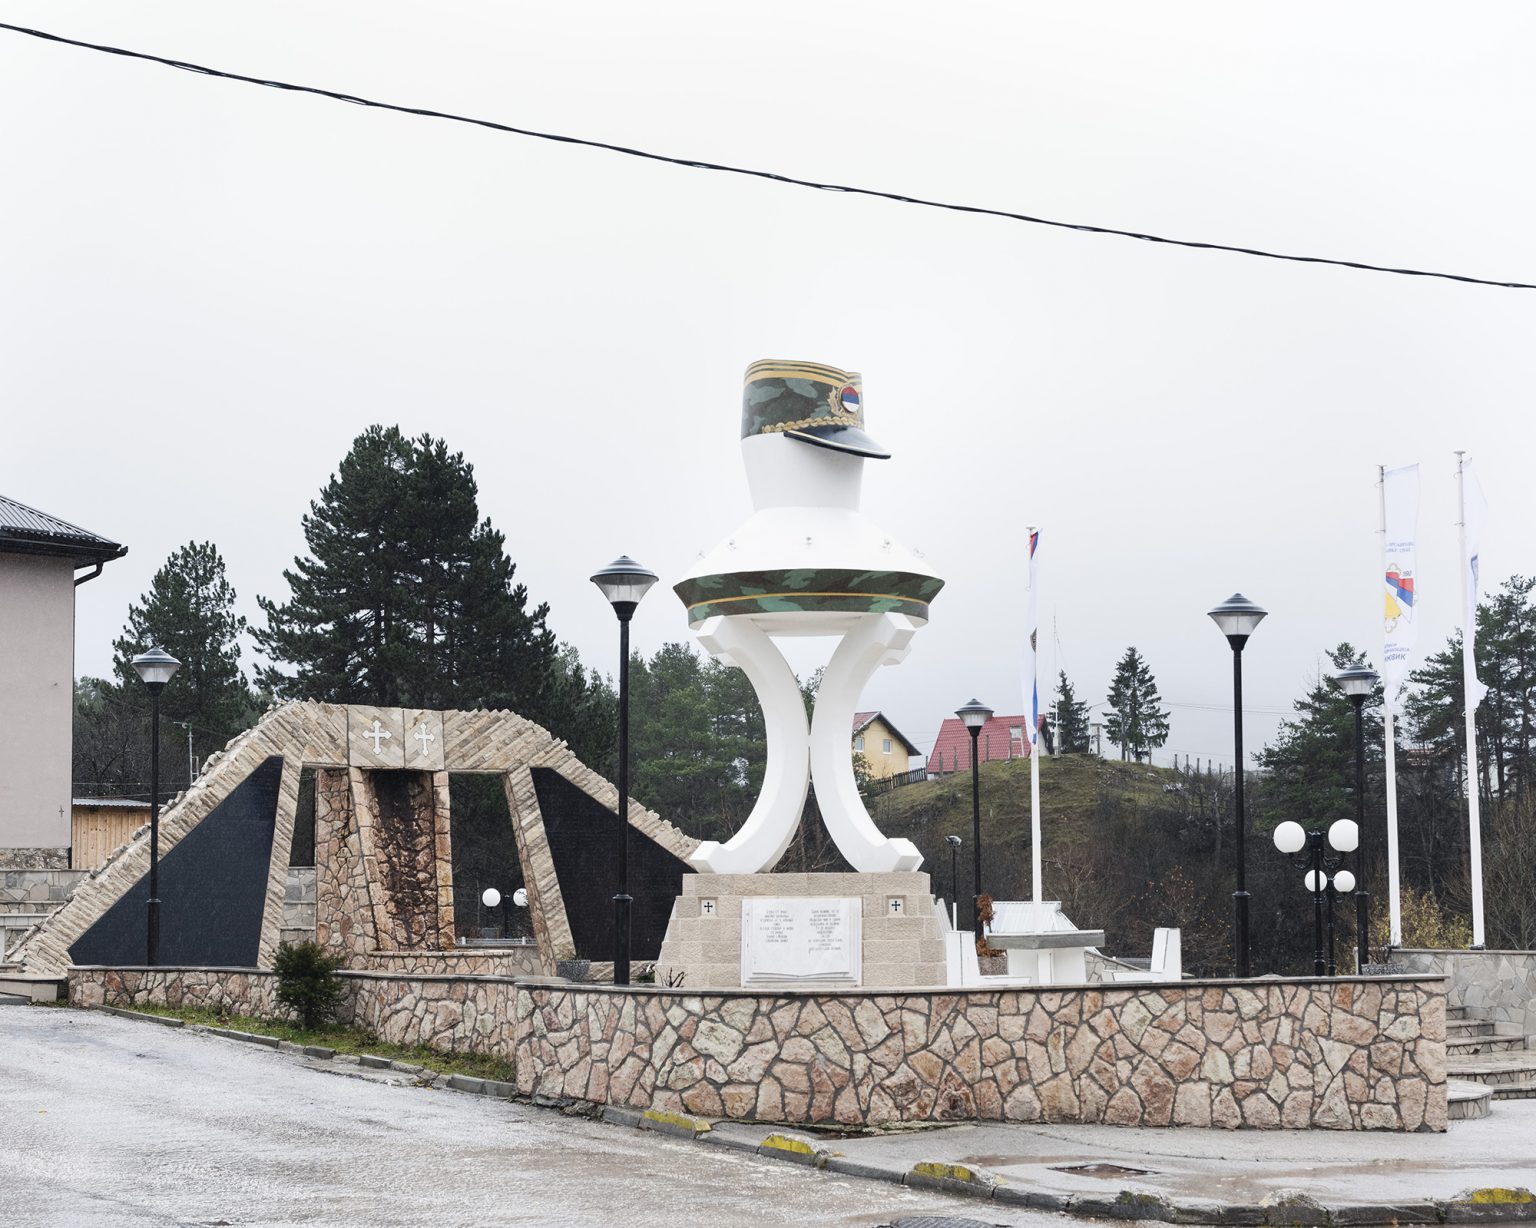 Kalinovik, November 2021. Kalinovik is the municipality where Ratko Mladic, general of the Republika Srpska army during the war and convicted war criminal, was born.  In the central square a brand new monument in his honour was recently erected.